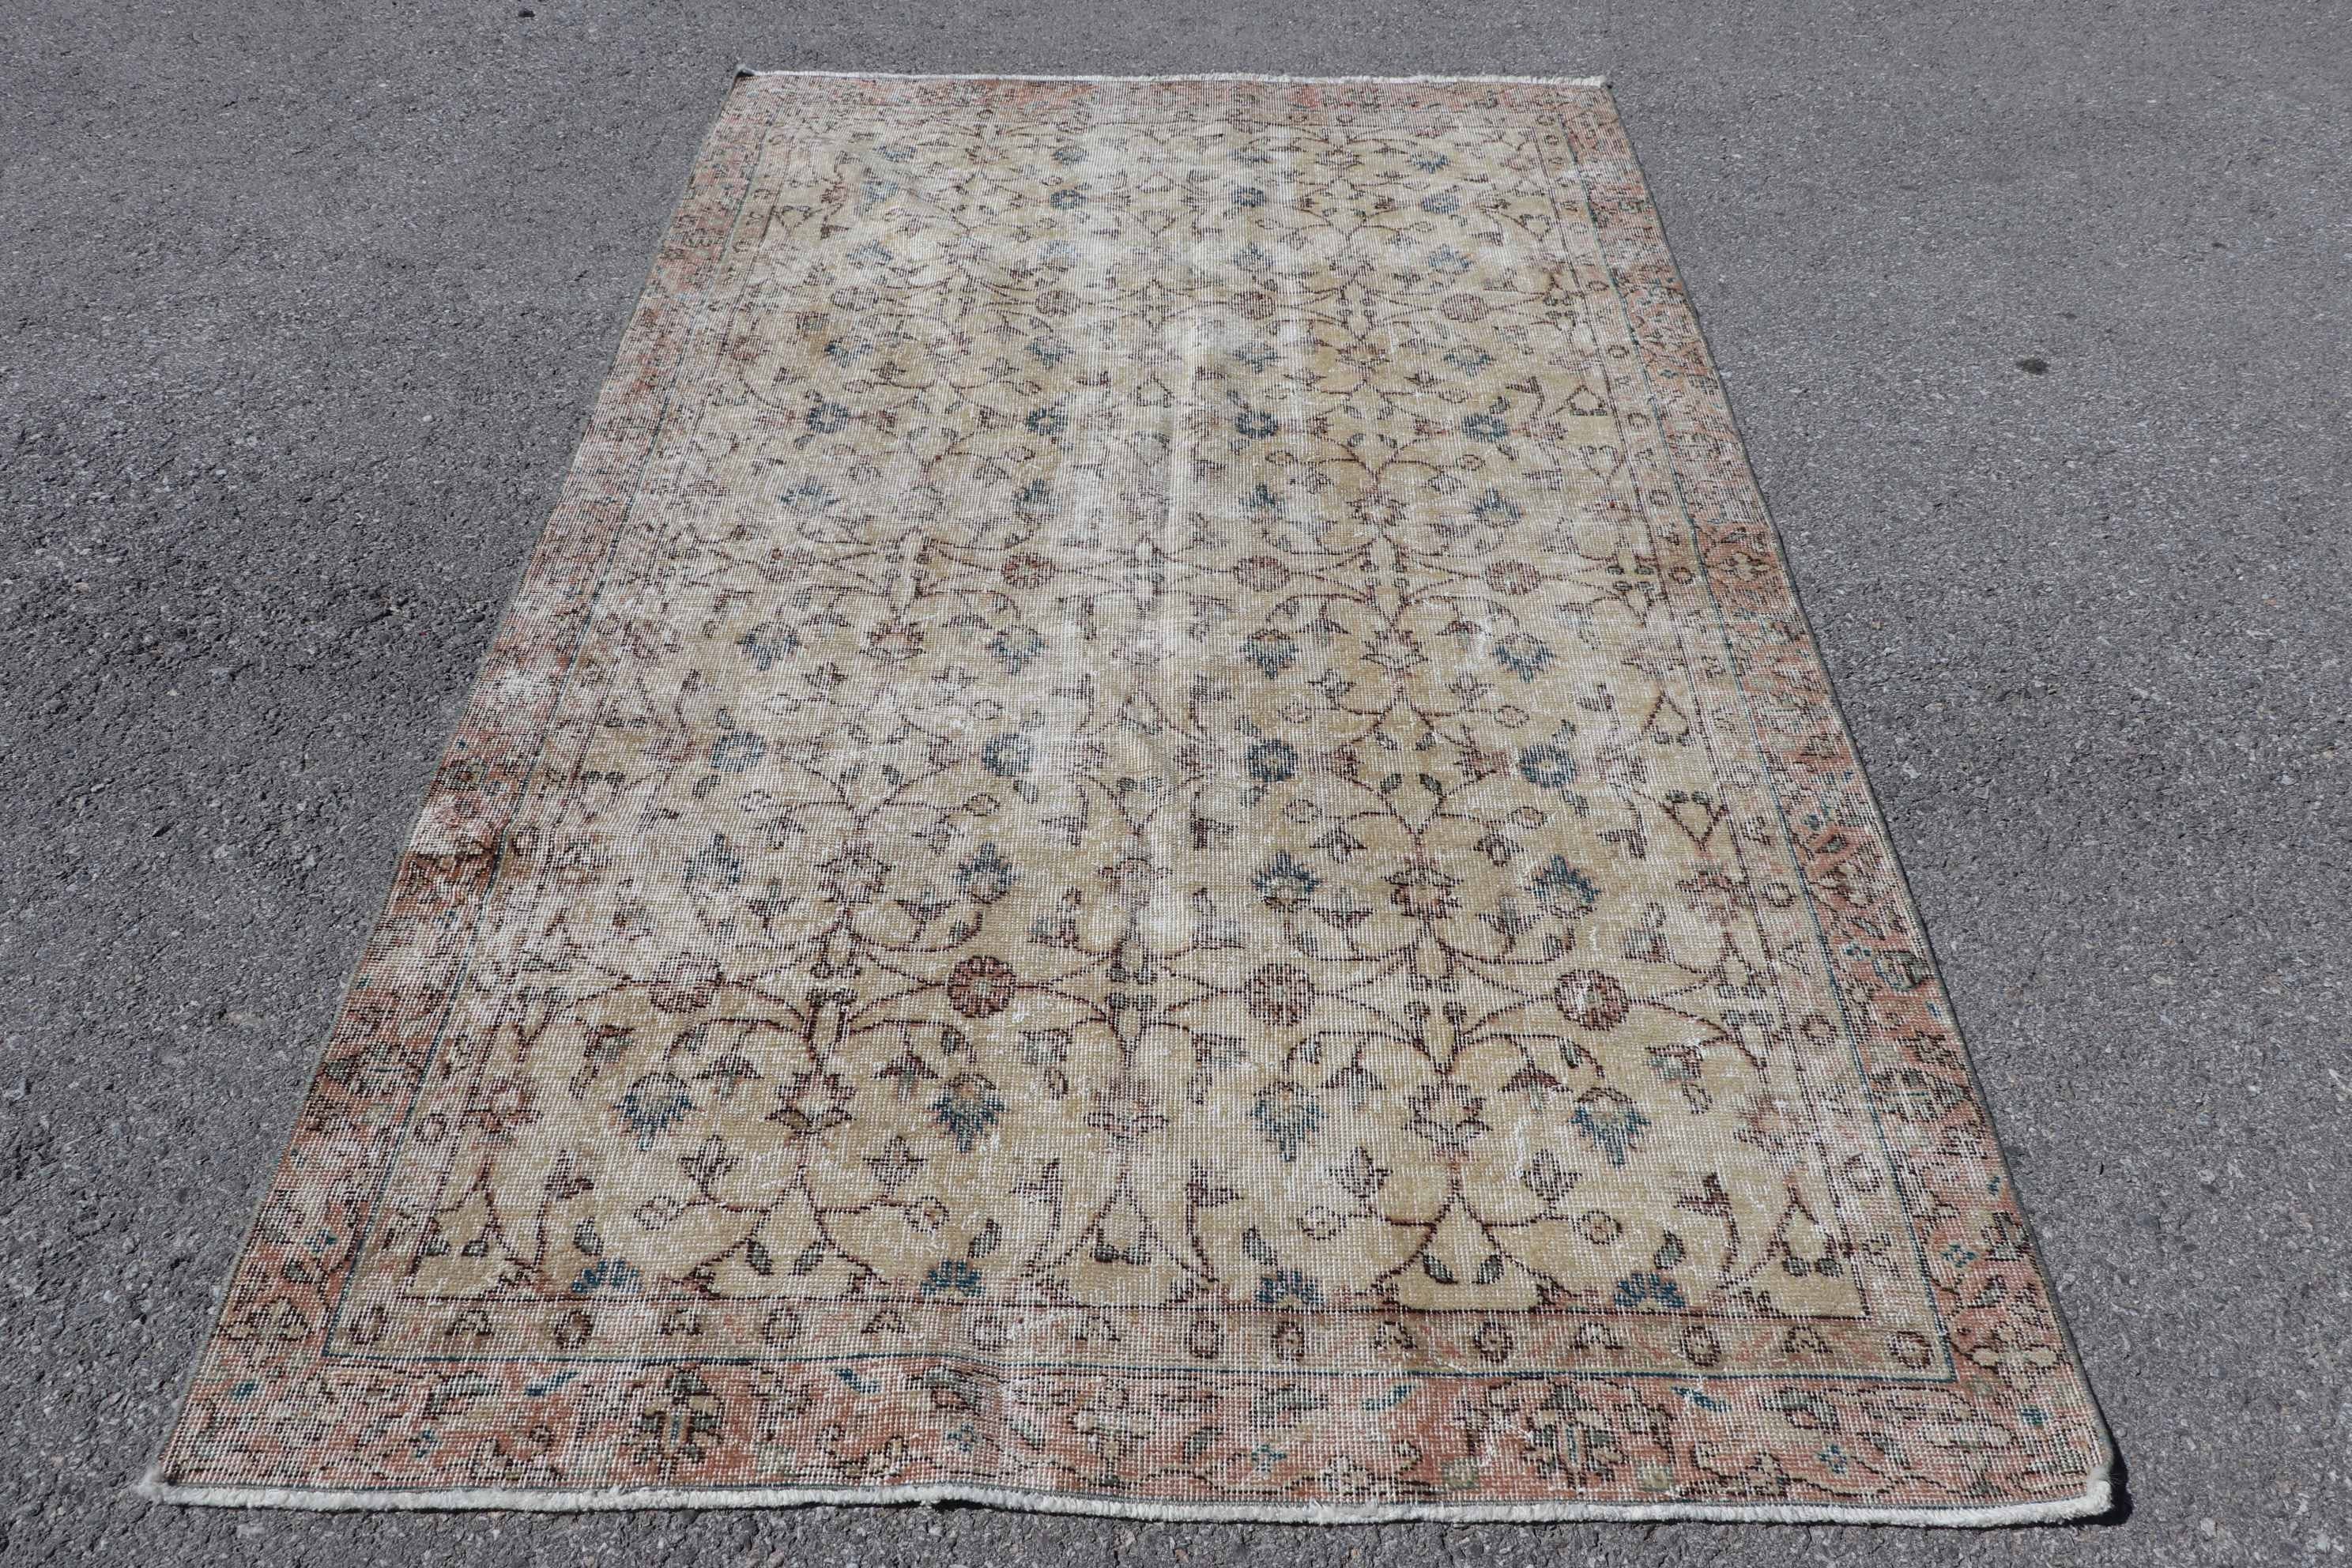 Rugs for Kitchen, Turkish Rug, 4.7x7.9 ft Area Rug, Beige Anatolian Rugs, Home Decor Rugs, Vintage Rug, Living Room Rugs, Antique Rug